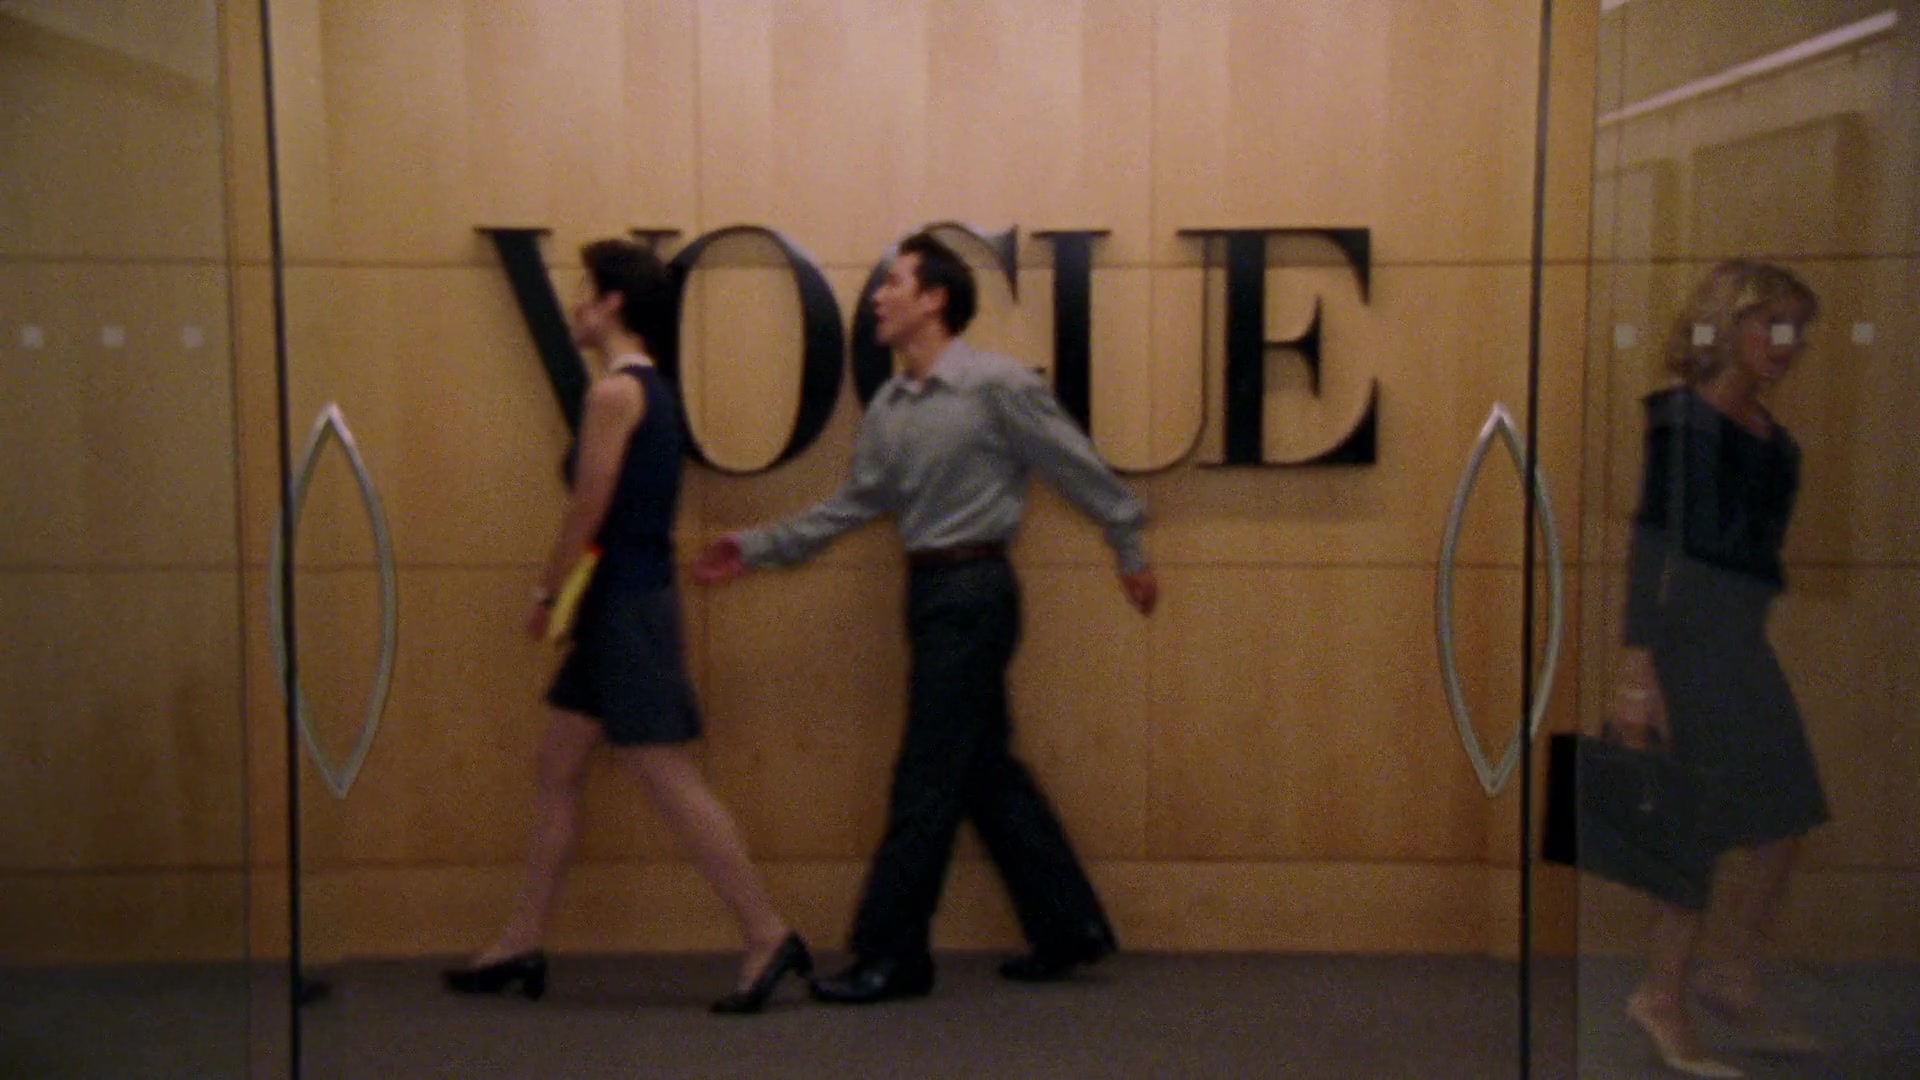 Vogue Magazine Office In Sex And The City S04e17 A Vogue Idea 2002